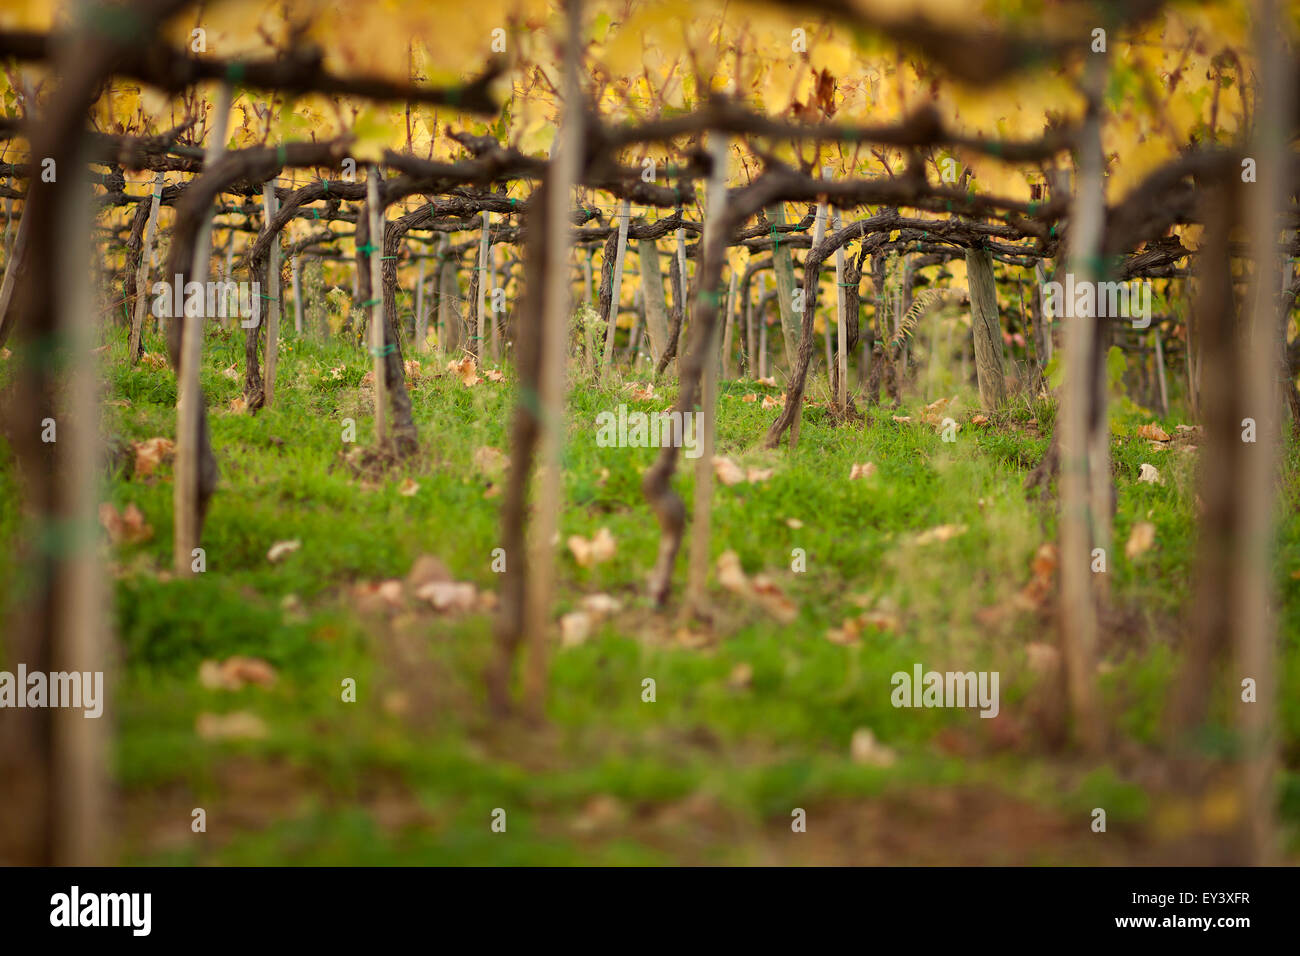 Close up of the stems and trained branches of the vines in a vineyard. Stock Photo